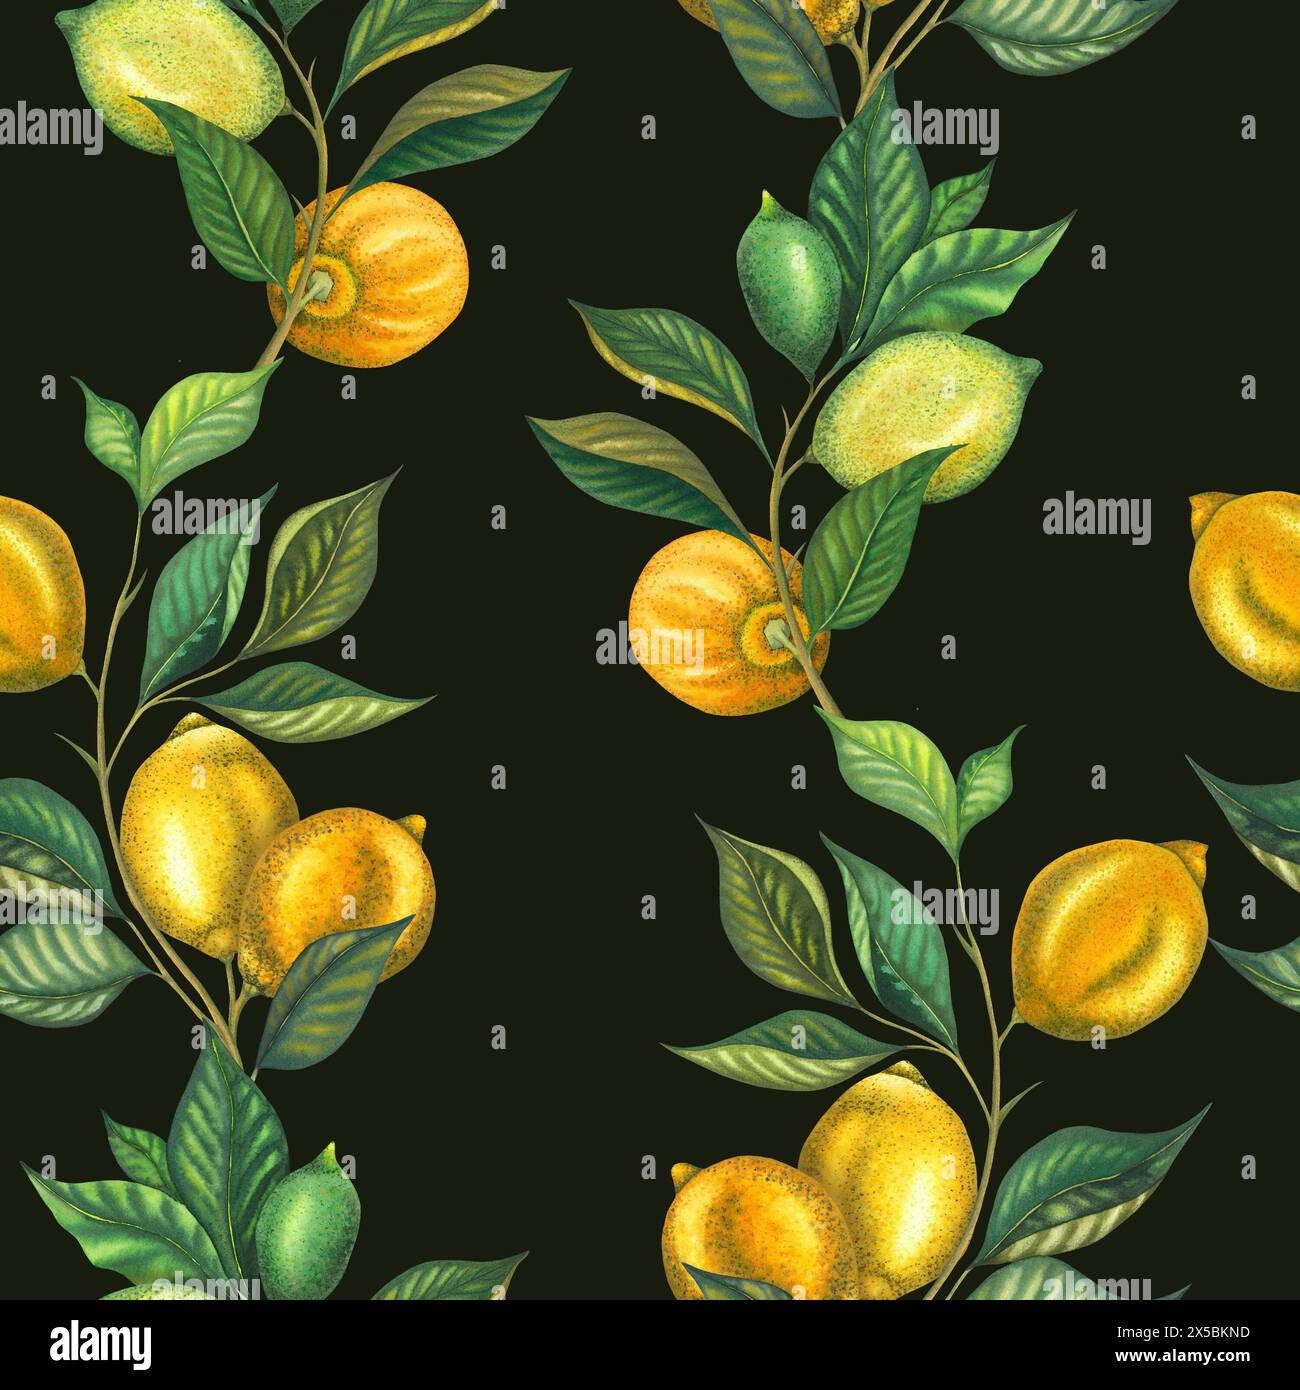 Watercolor seamless pattern with lemon branches and lime branch with leaves and green lemon. Hand painted yellow fruits isolated on black background. Stock Photo